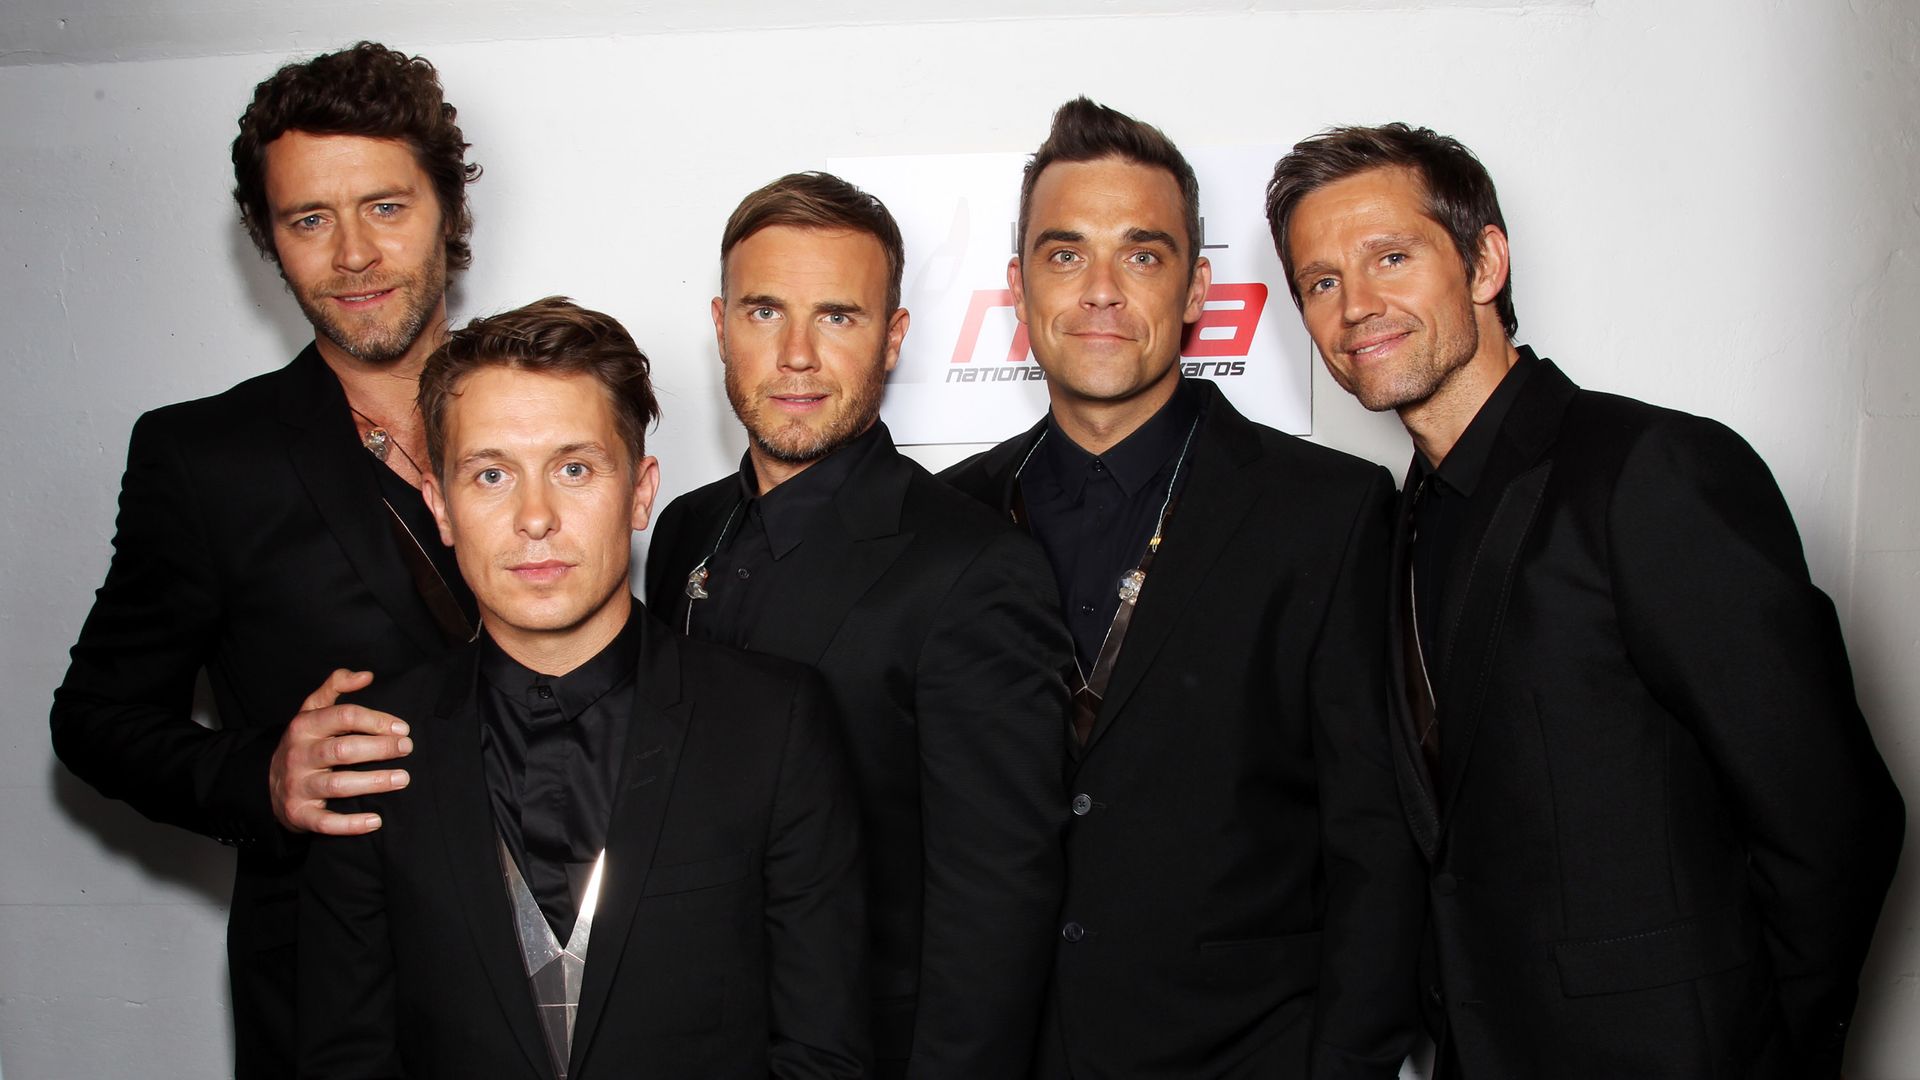 Robbie Williams: Why did he leave Take That and is he still friends with Gary Barlow?